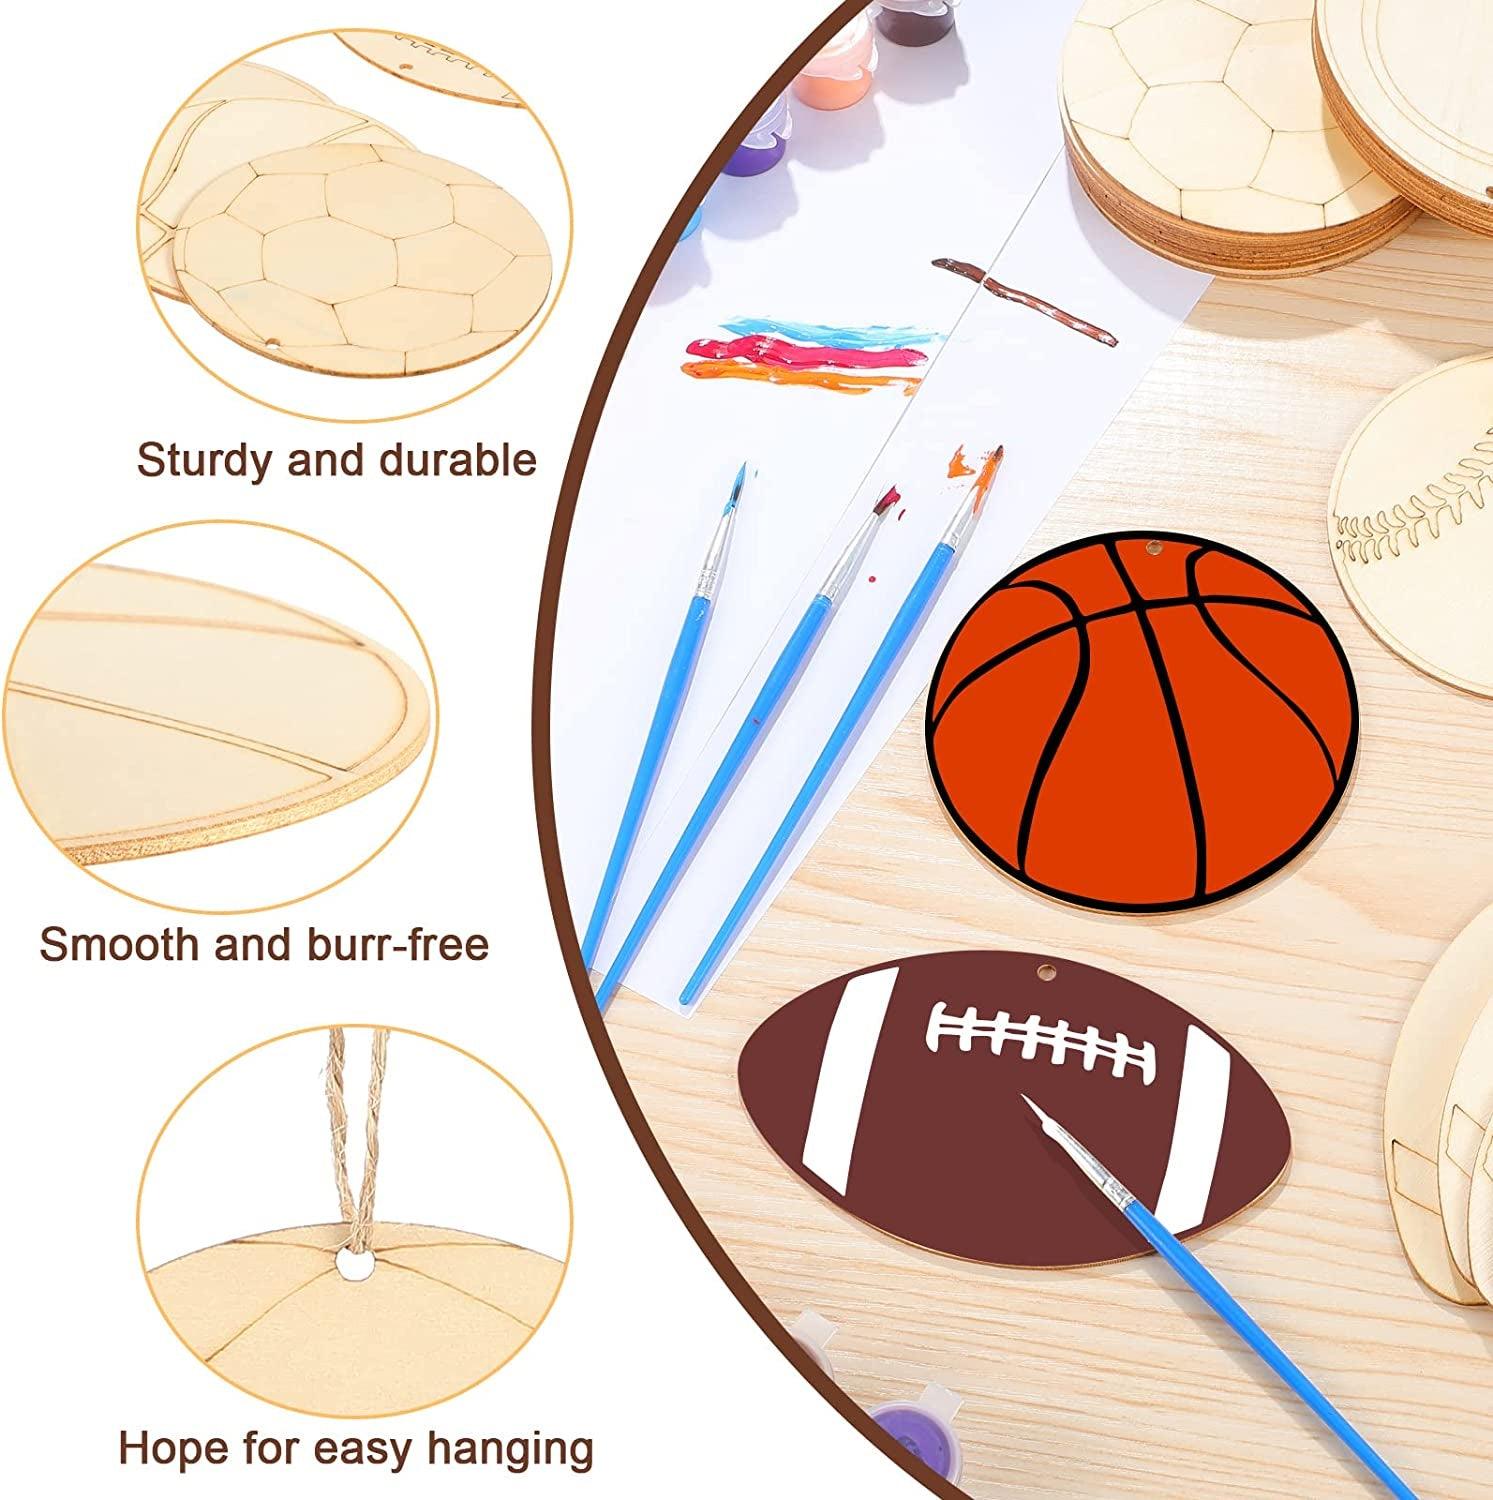 42 Pieces Sports Theme Wooden Cutouts Unfinished Wood Football Volleyball Baseball Basketball Soccer Tennis Shaped Wood Slices with Twines Wood Hanging - WoodArtSupply